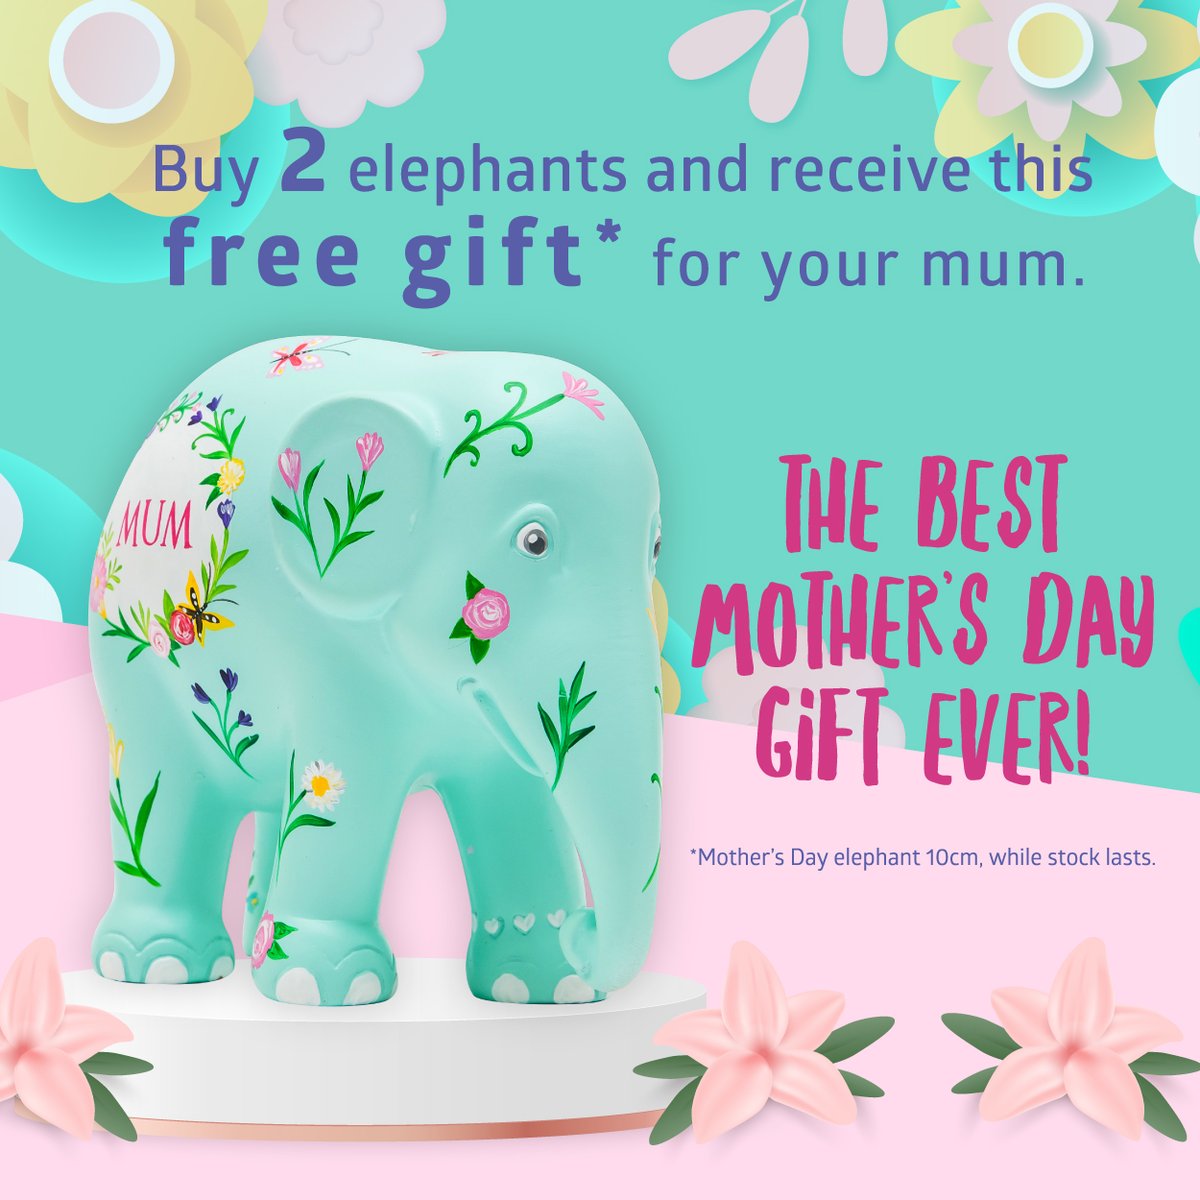 A delightful surprise for Mother's Day! Let's celebrate every mom, 'stand-in mom' and the mothers-at-heart! When you purchase two replicas, we'll include a charming 10cm Mother's Day elephant for free.⁠ 💖 (offer valid while stock lasts)⁠ ⁠ ⁠ #elephantparade #savetheelephant